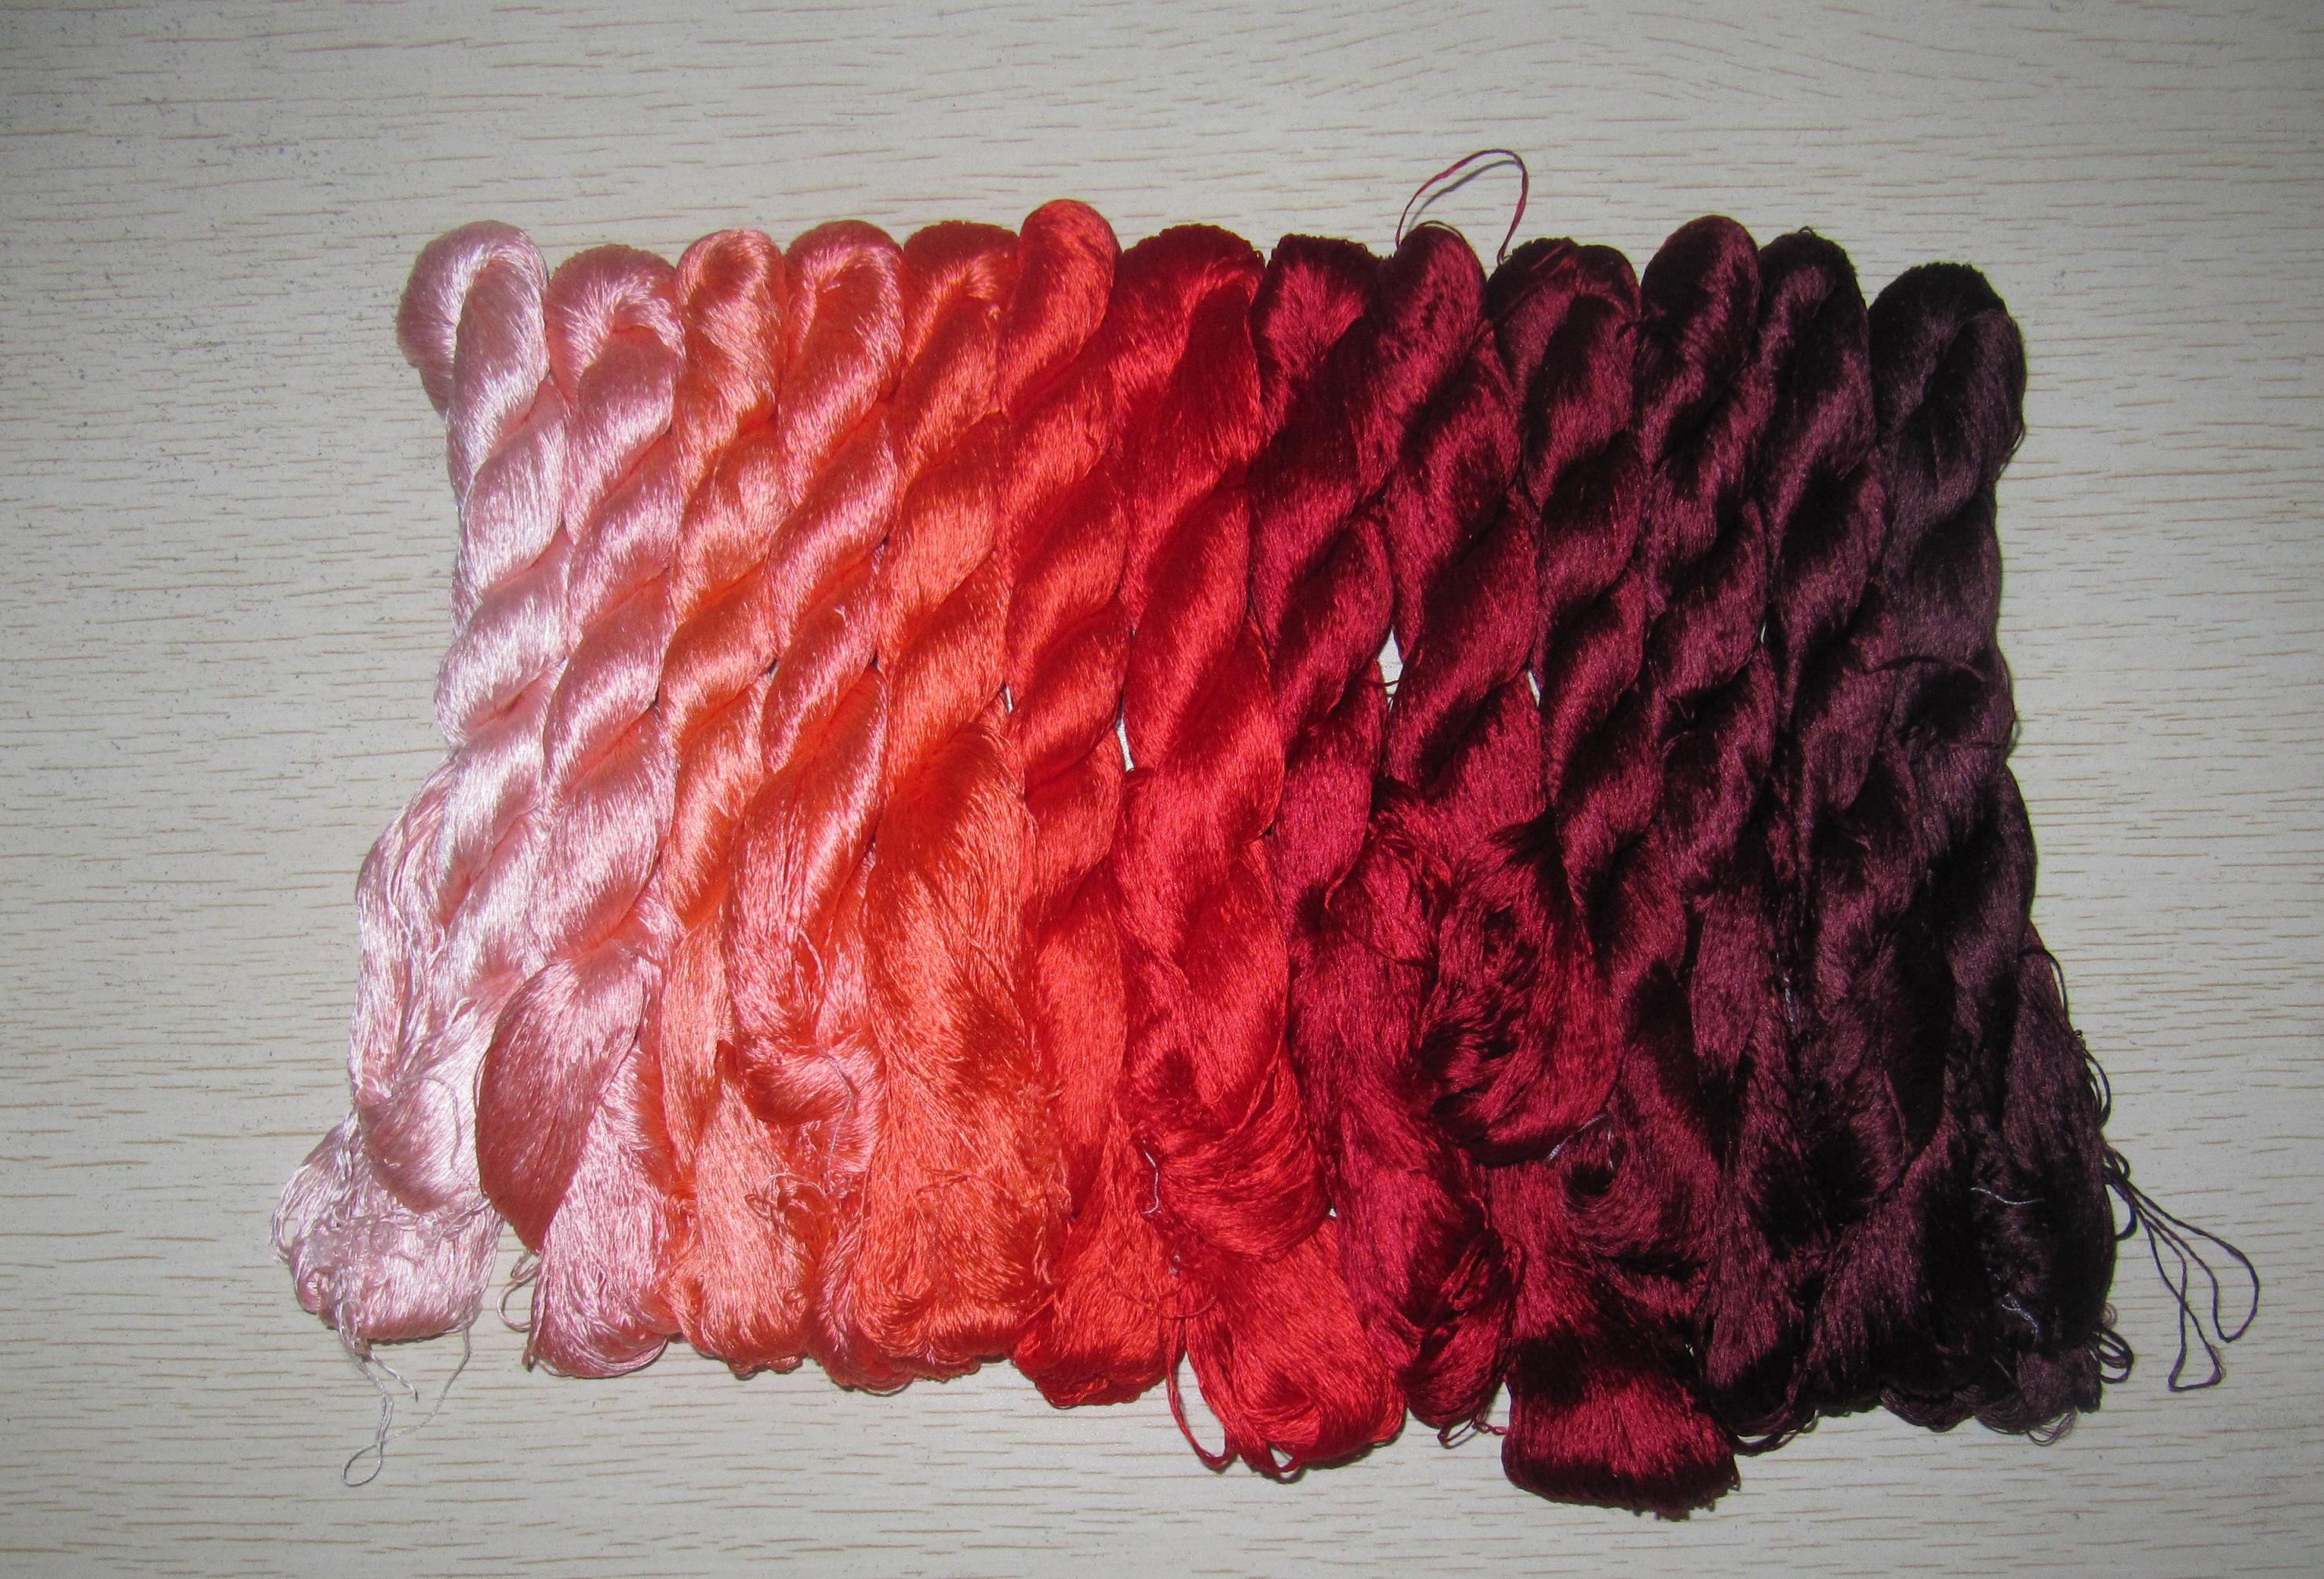 Hand-dyed natural silk embroidery floss / threads